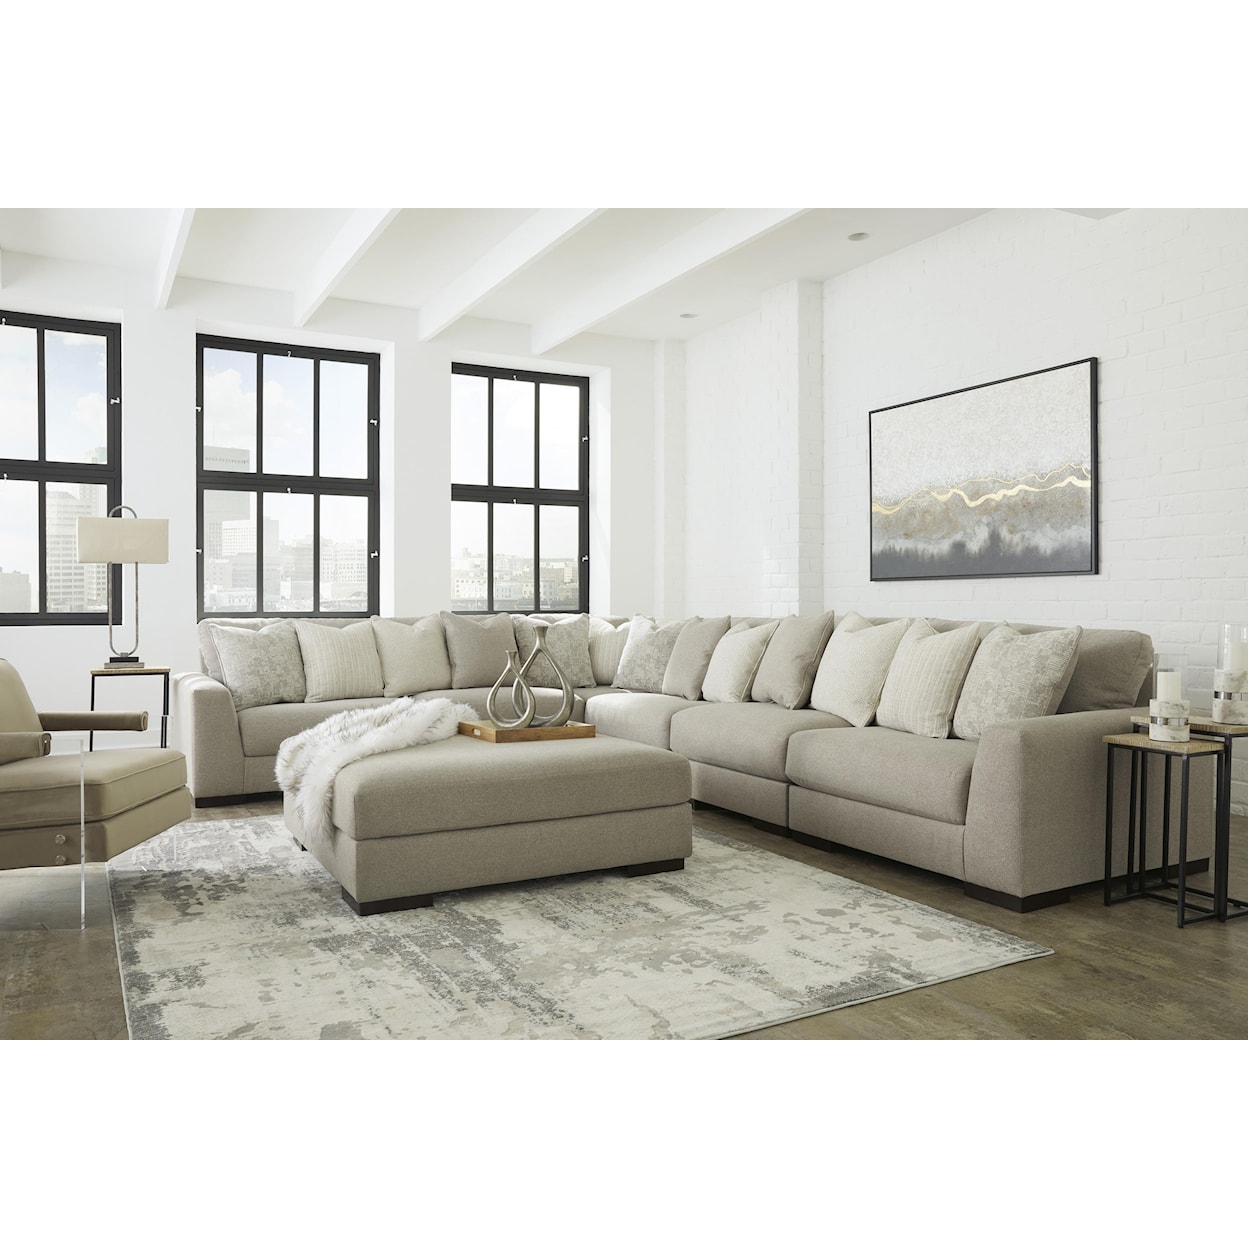 Ashley Furniture Lyndeboro 7 Piece Sectional Living Room Set